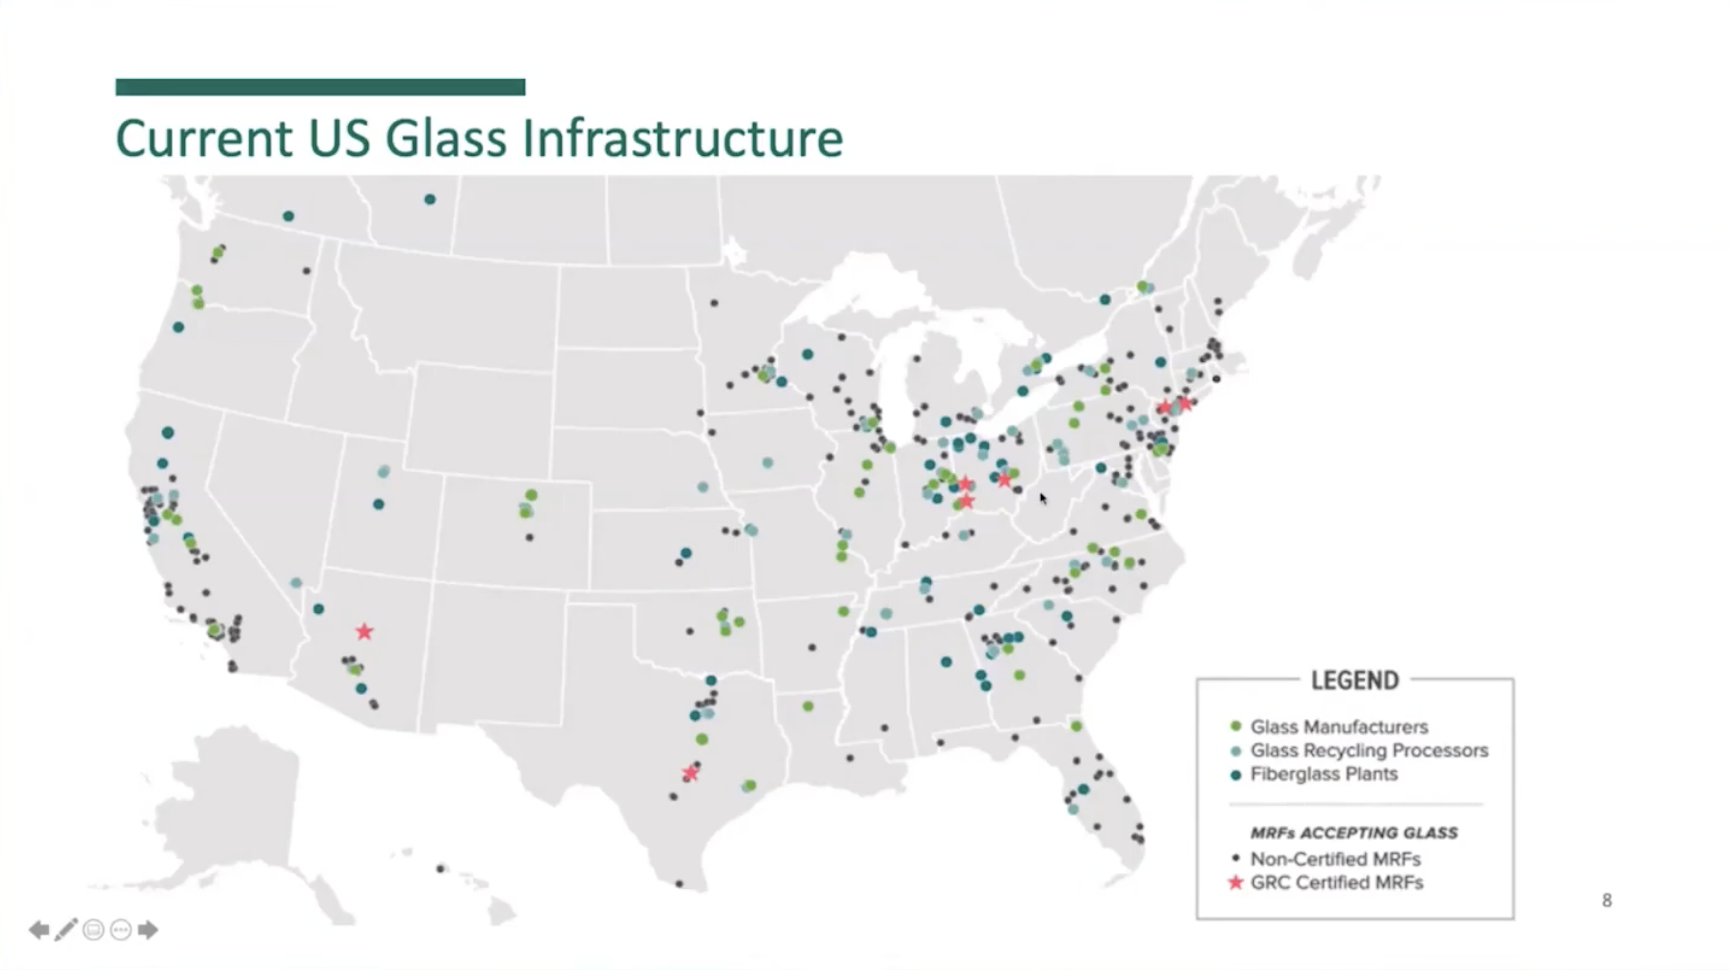 US Glass Infrastructure at a glance